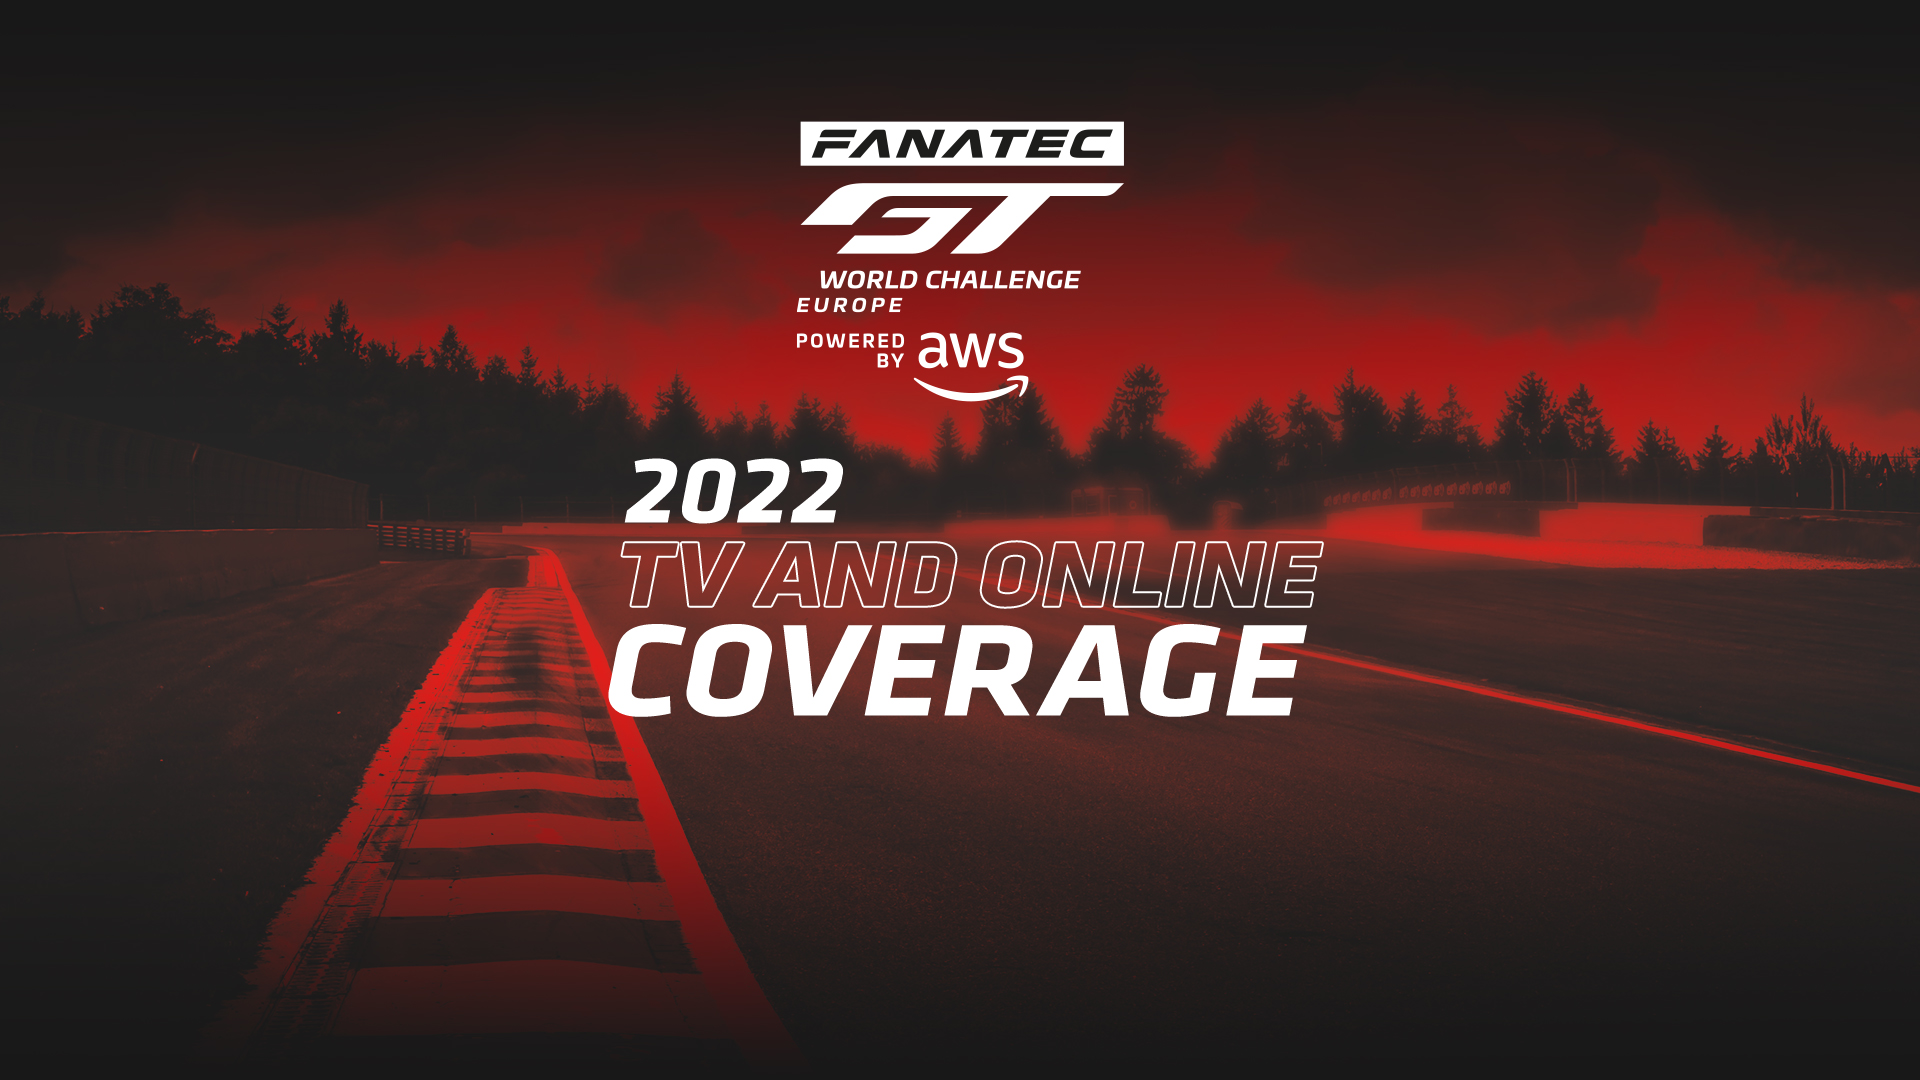 Expanded partnership with Sky takes live coverage to UK, Italy and Germany, adding to extensive television and online broadcast agreements for 2022 Fanatec GT World Challenge Europe Powered by AWS